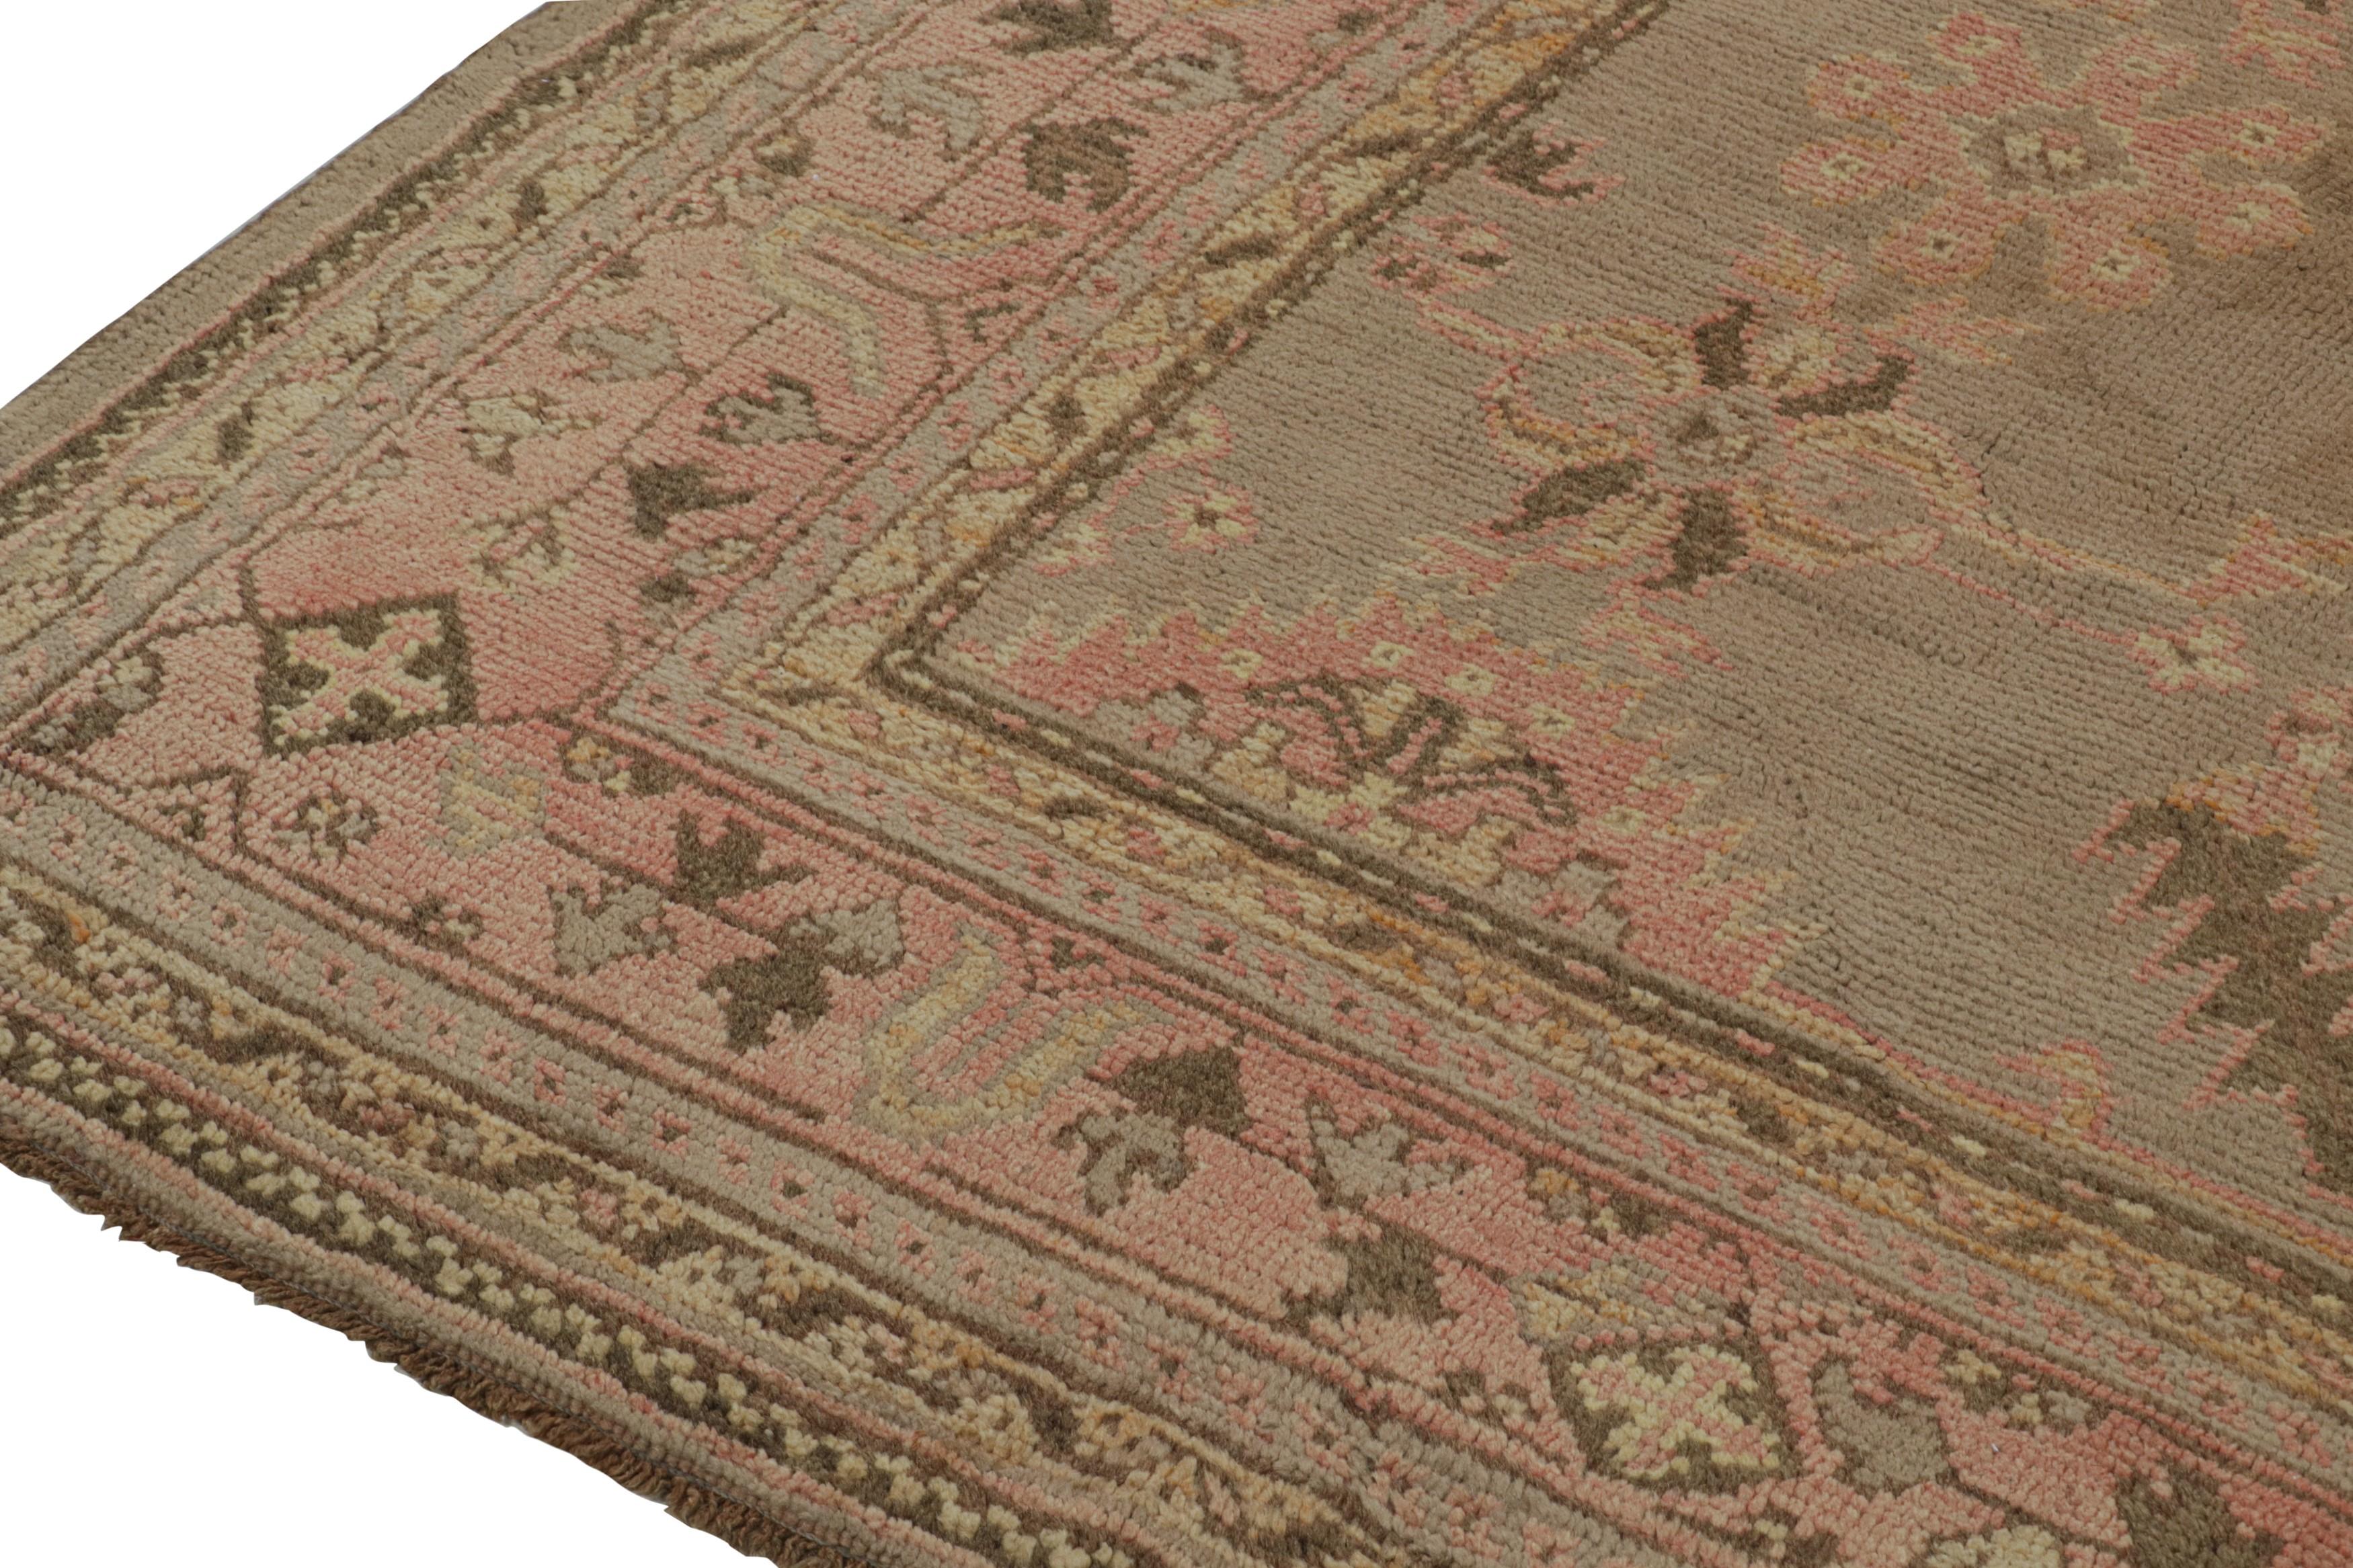 Turkish Vintage Oushak Rug with Beige-Brown and Pink Floral Patterns, from Rug & Kilim For Sale